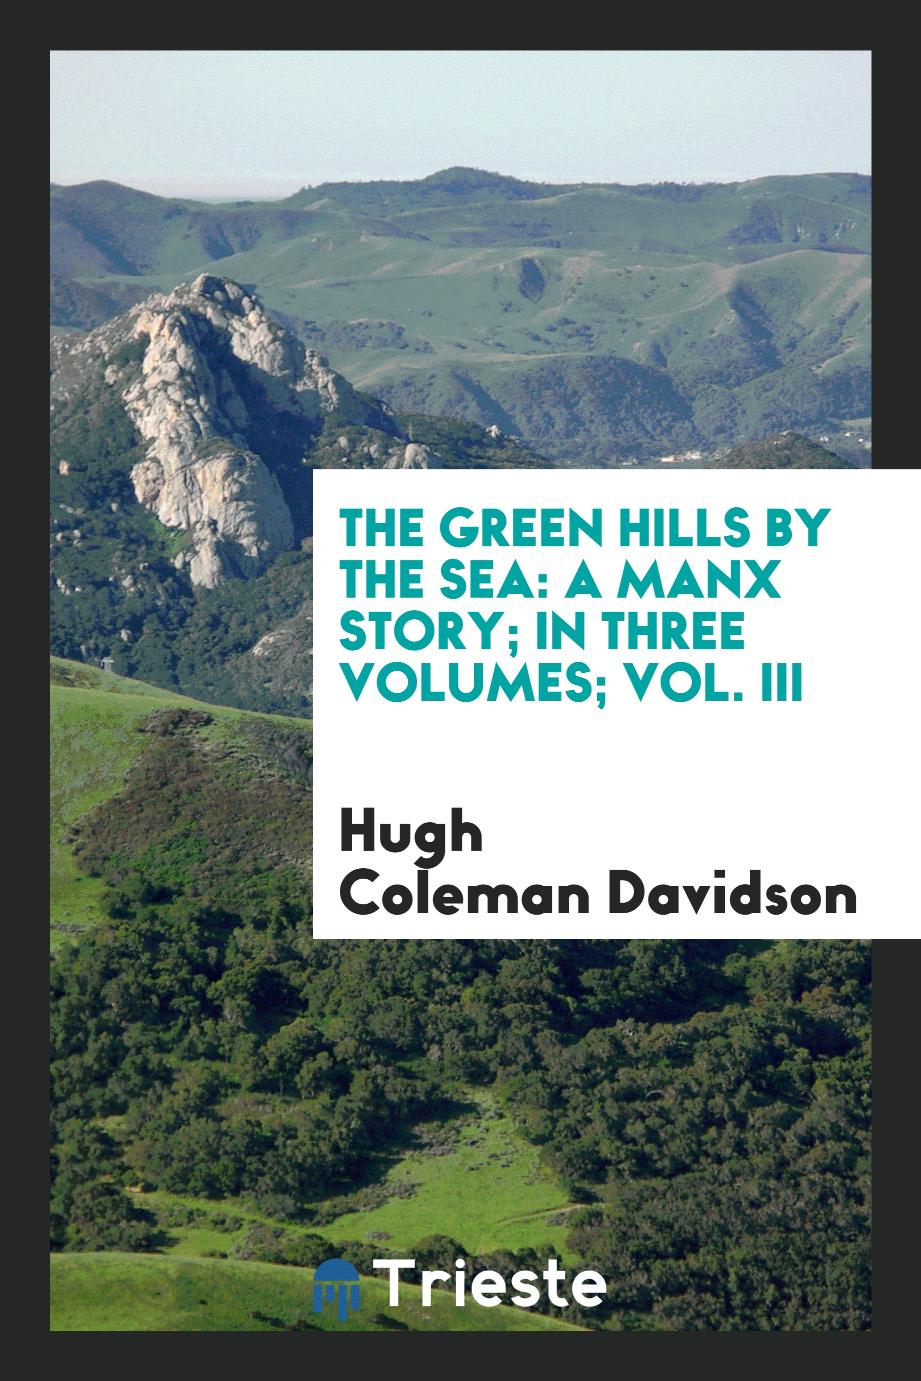 The green hills by the sea: A Manx story; in three volumes; Vol. III